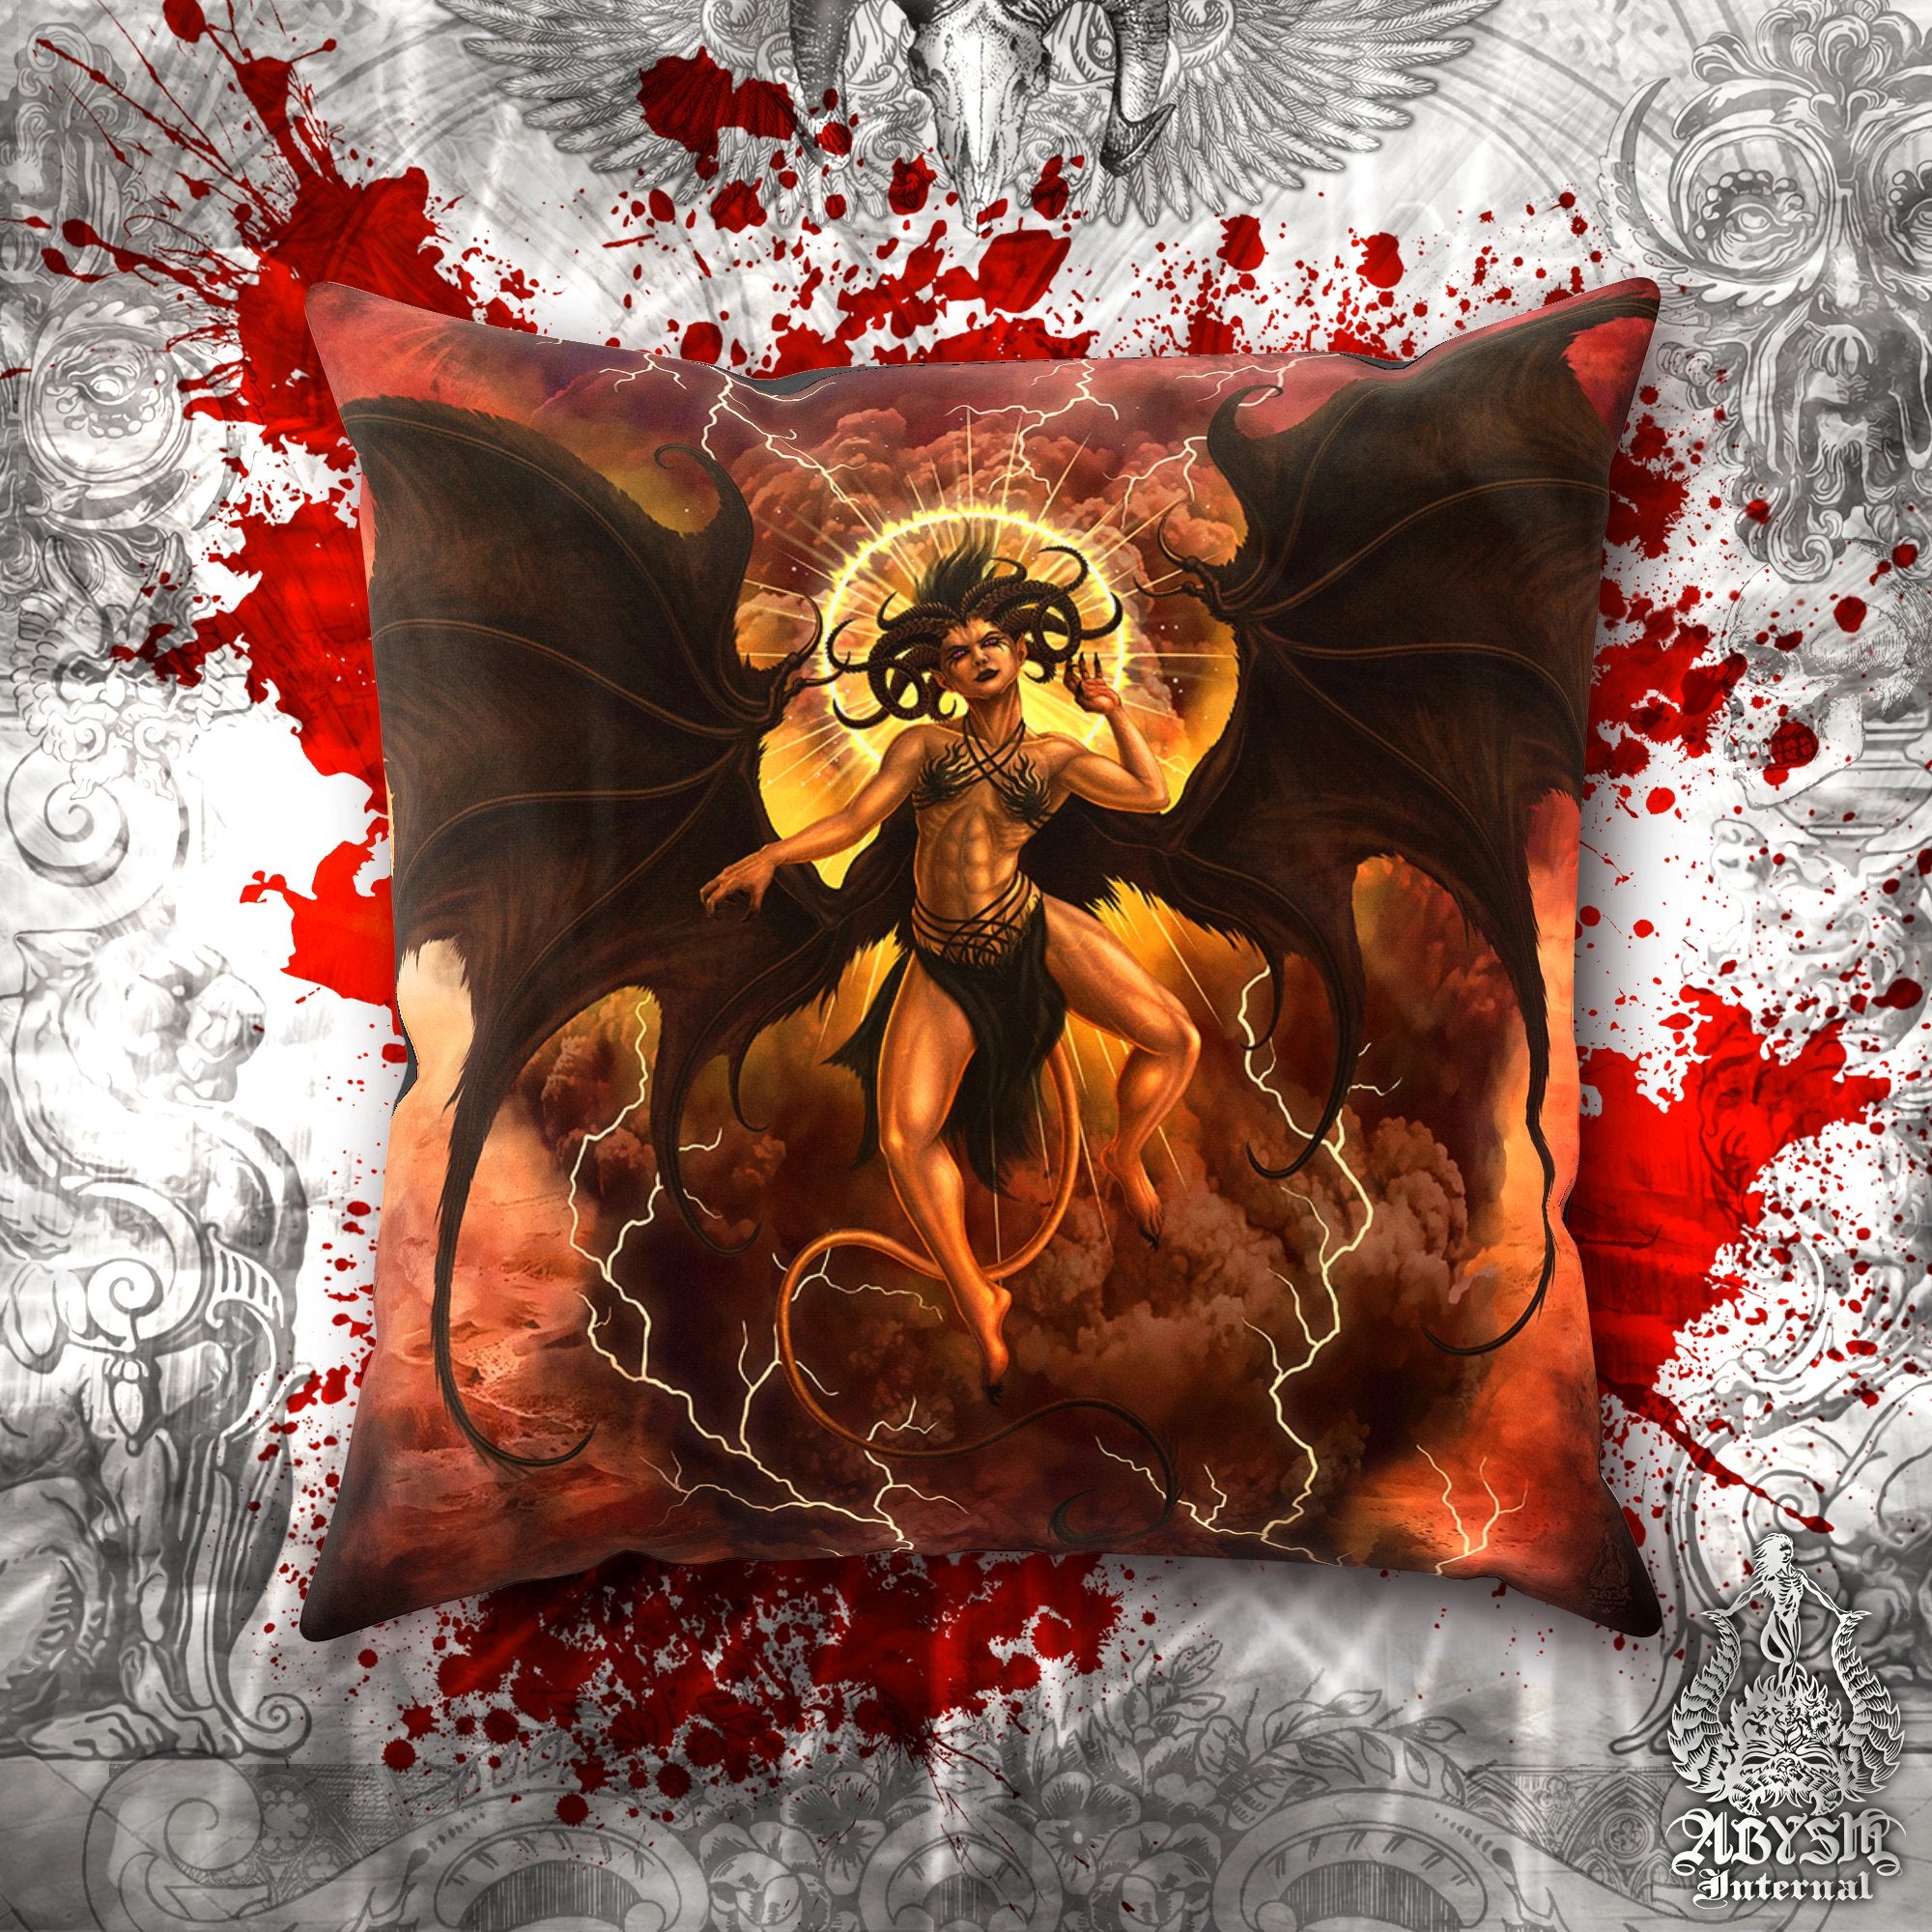 Lilith Throw Pillow, Decorative Accent Pillow, Square Cushion Cover, Demon, Game Room Decor, Dark Fantasy, Erotic Art, Alternative Home - Clothed, Semi, Nude, 3 versions - Abysm Internal